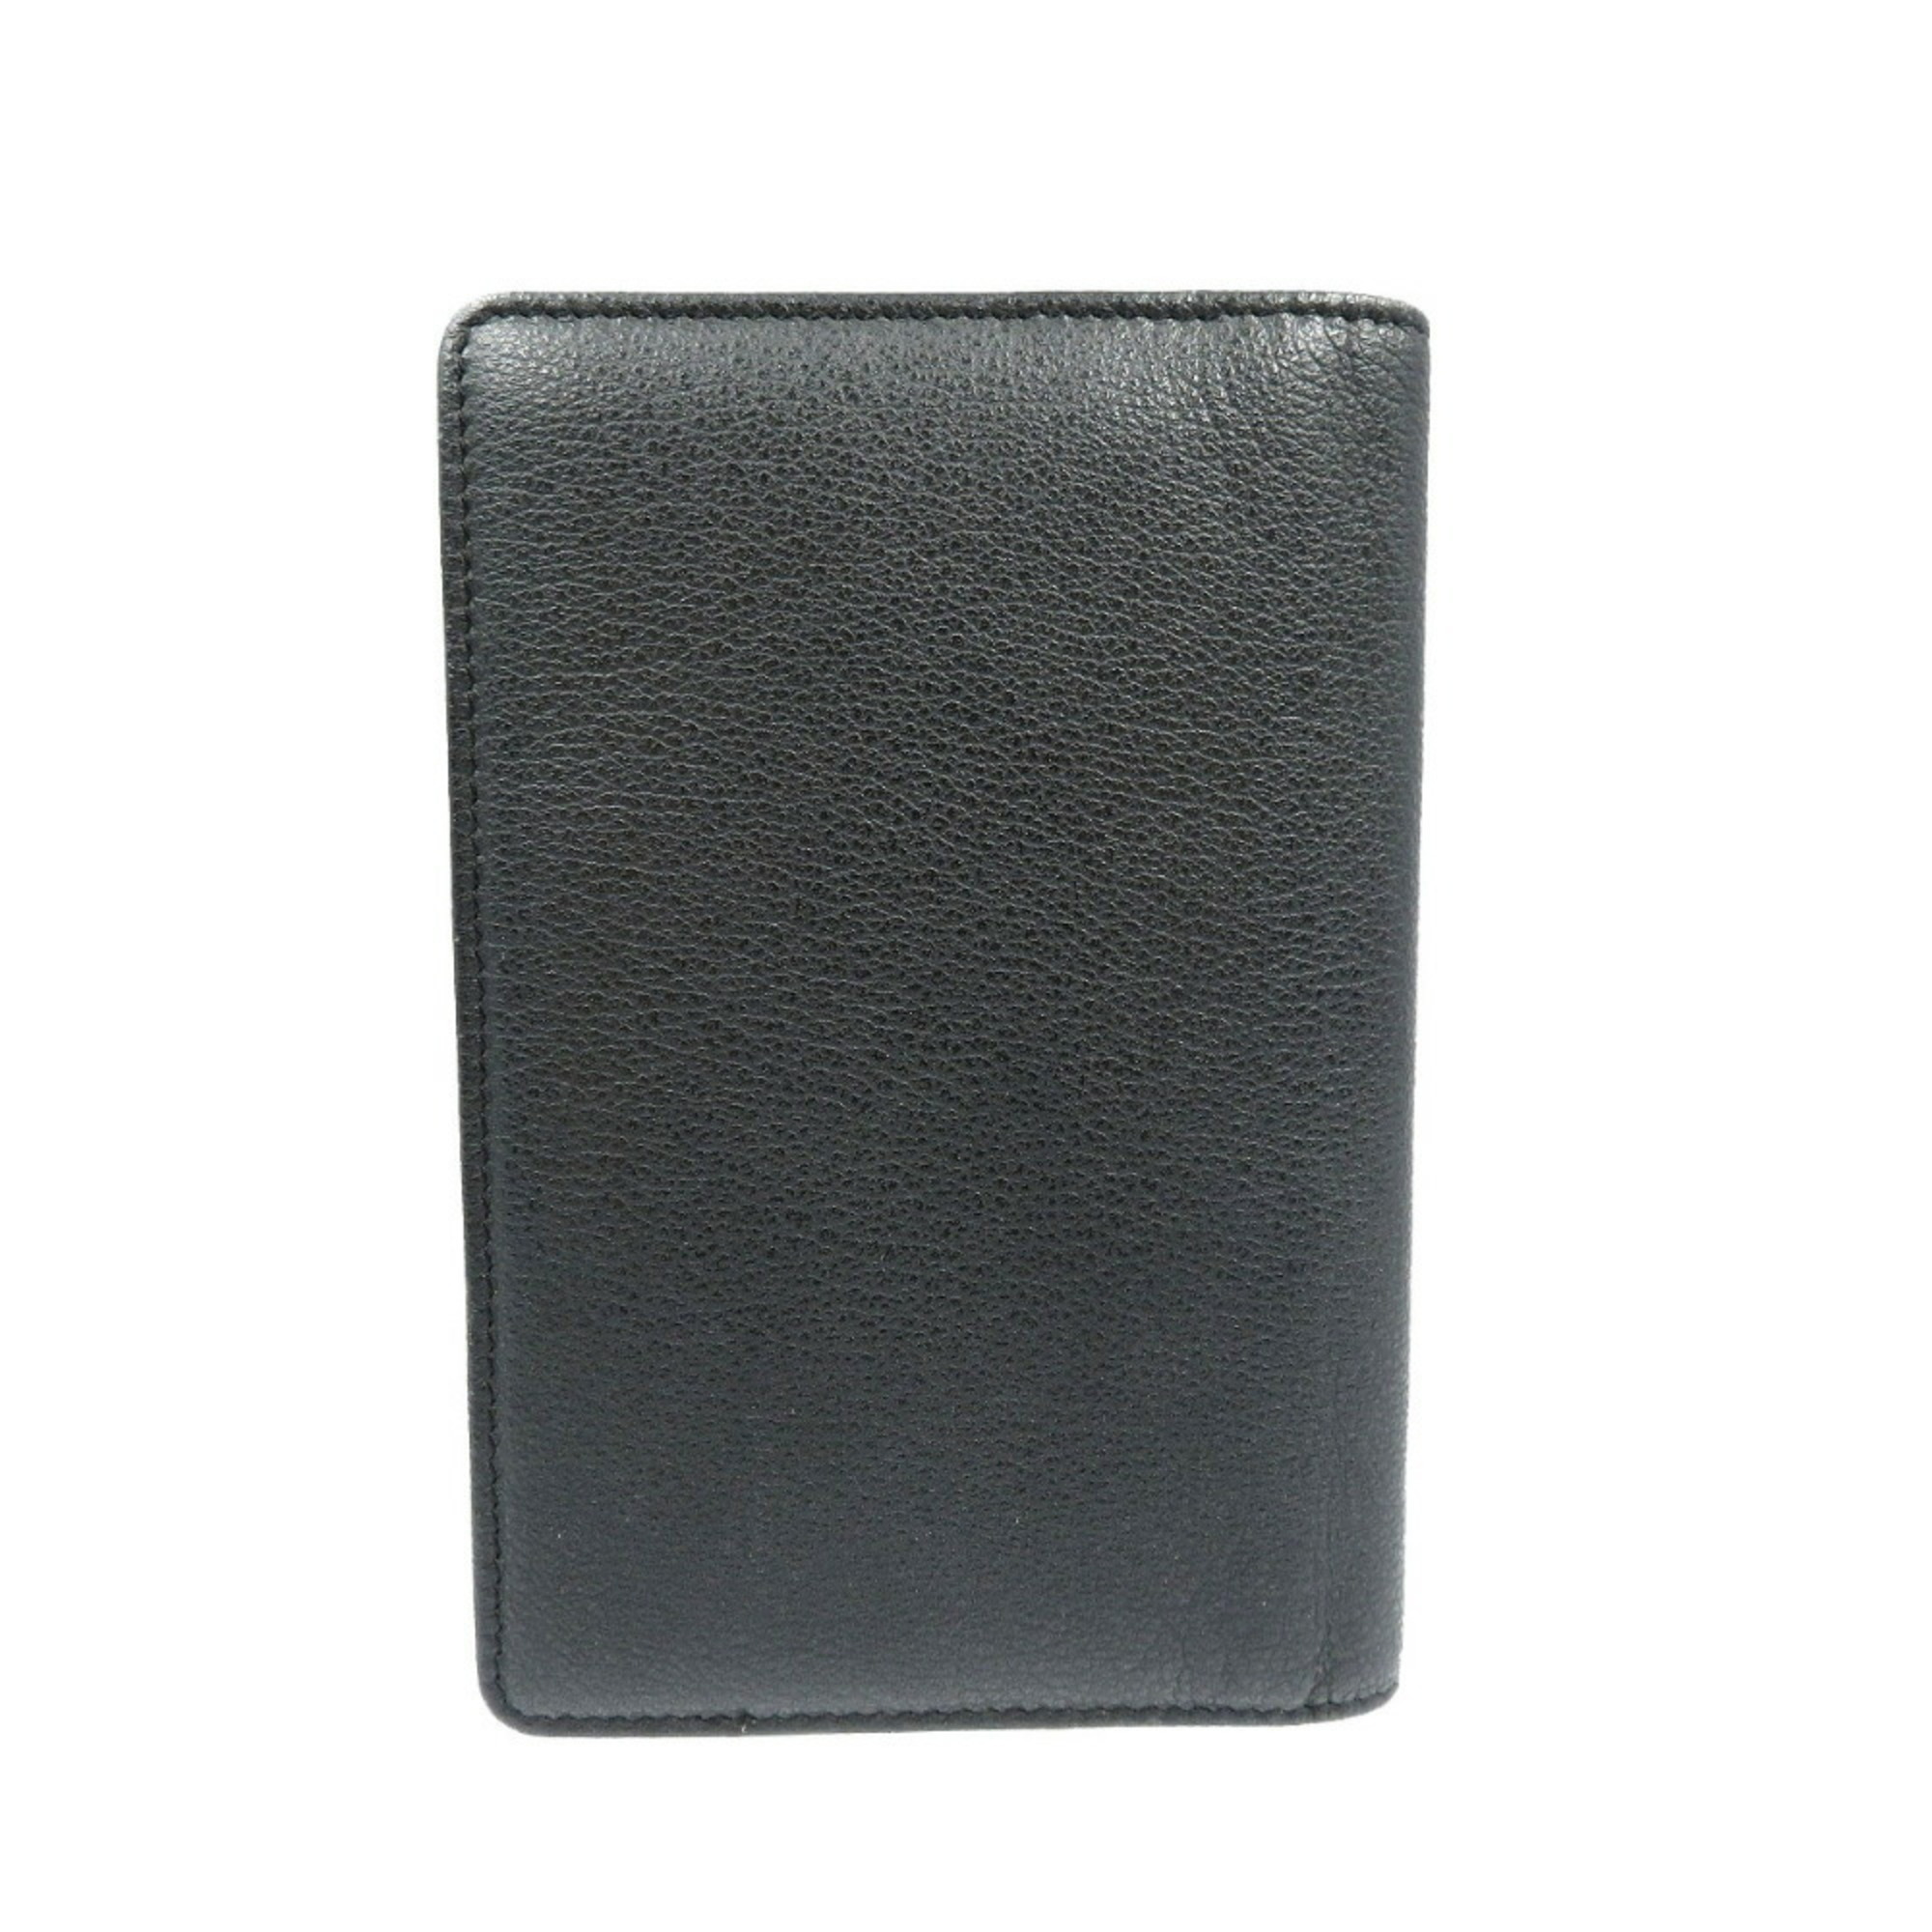 Chanel Camellia Leather Black No. 13 Notebook Cover 0111CHANEL